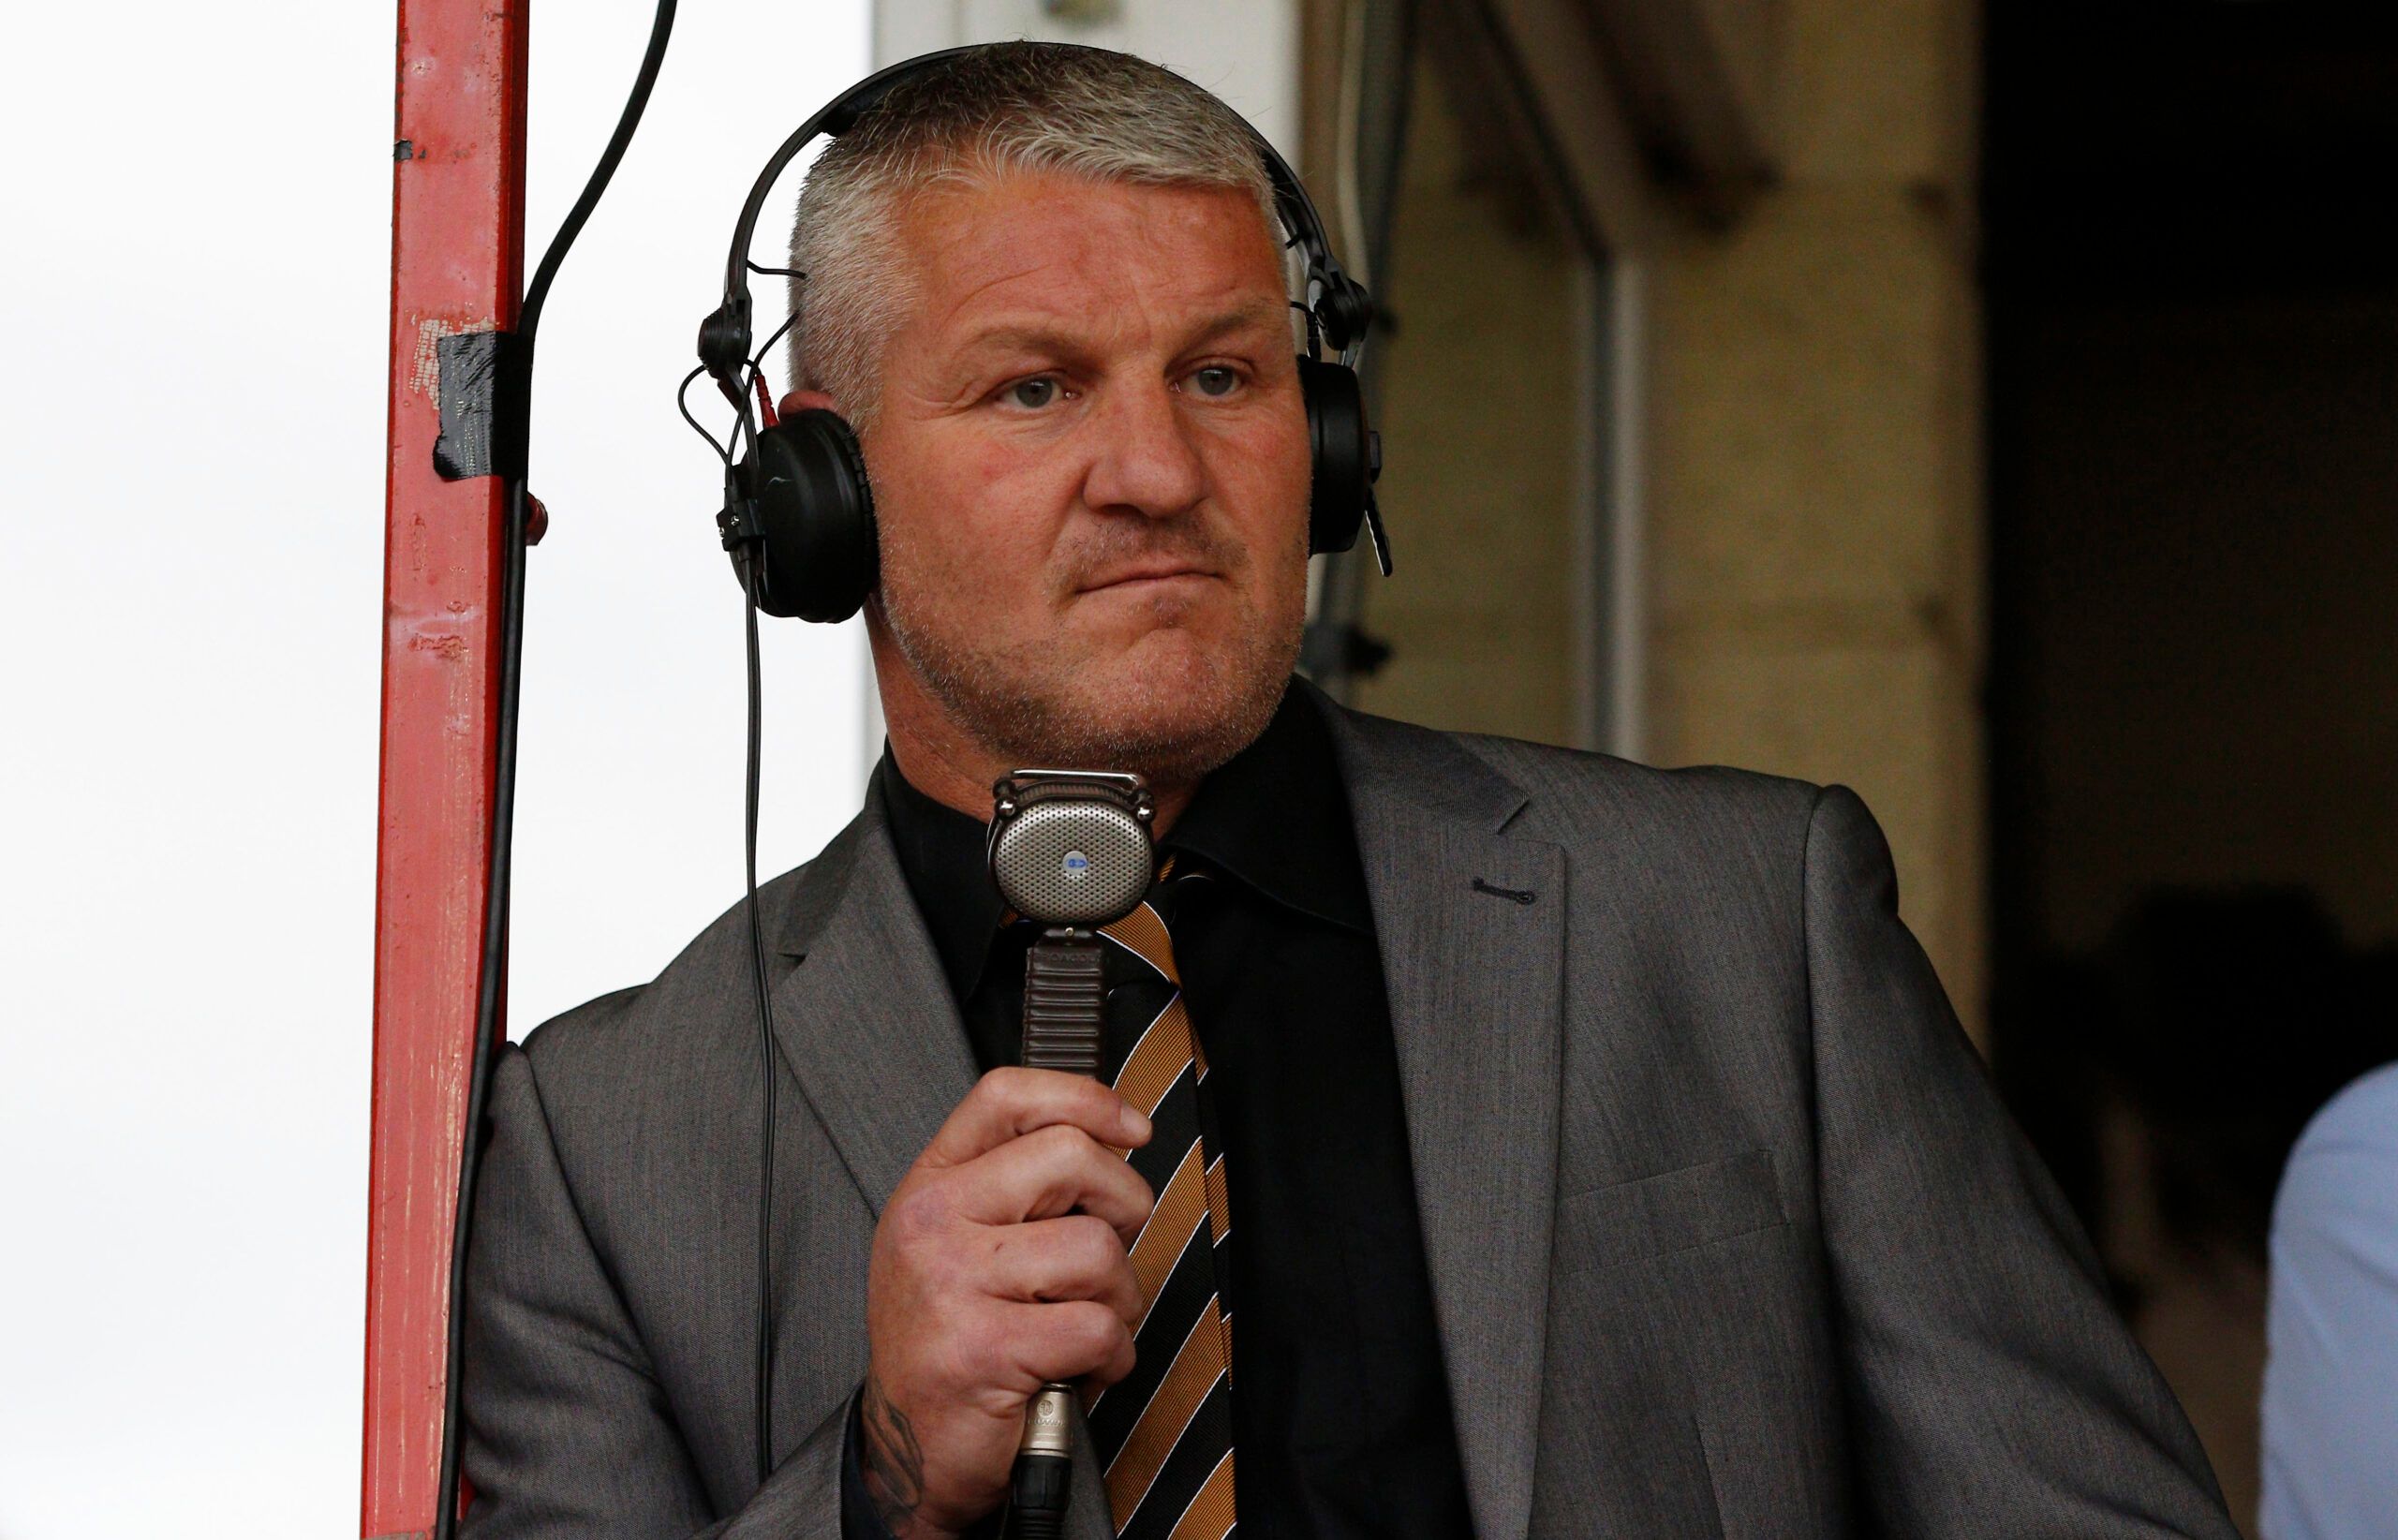 Football - Accrington Stanley v Hull City - Capital One Cup First Round - Store First Stadium - 11/8/15 
Former Hull City player and Club ambassador Dean Windass commentates 
Mandatory Credit: Action Images / Craig Brough 
Livepic 
EDITORIAL USE ONLY. No use with unauthorized audio, video, data, fixture lists, club/league logos or 